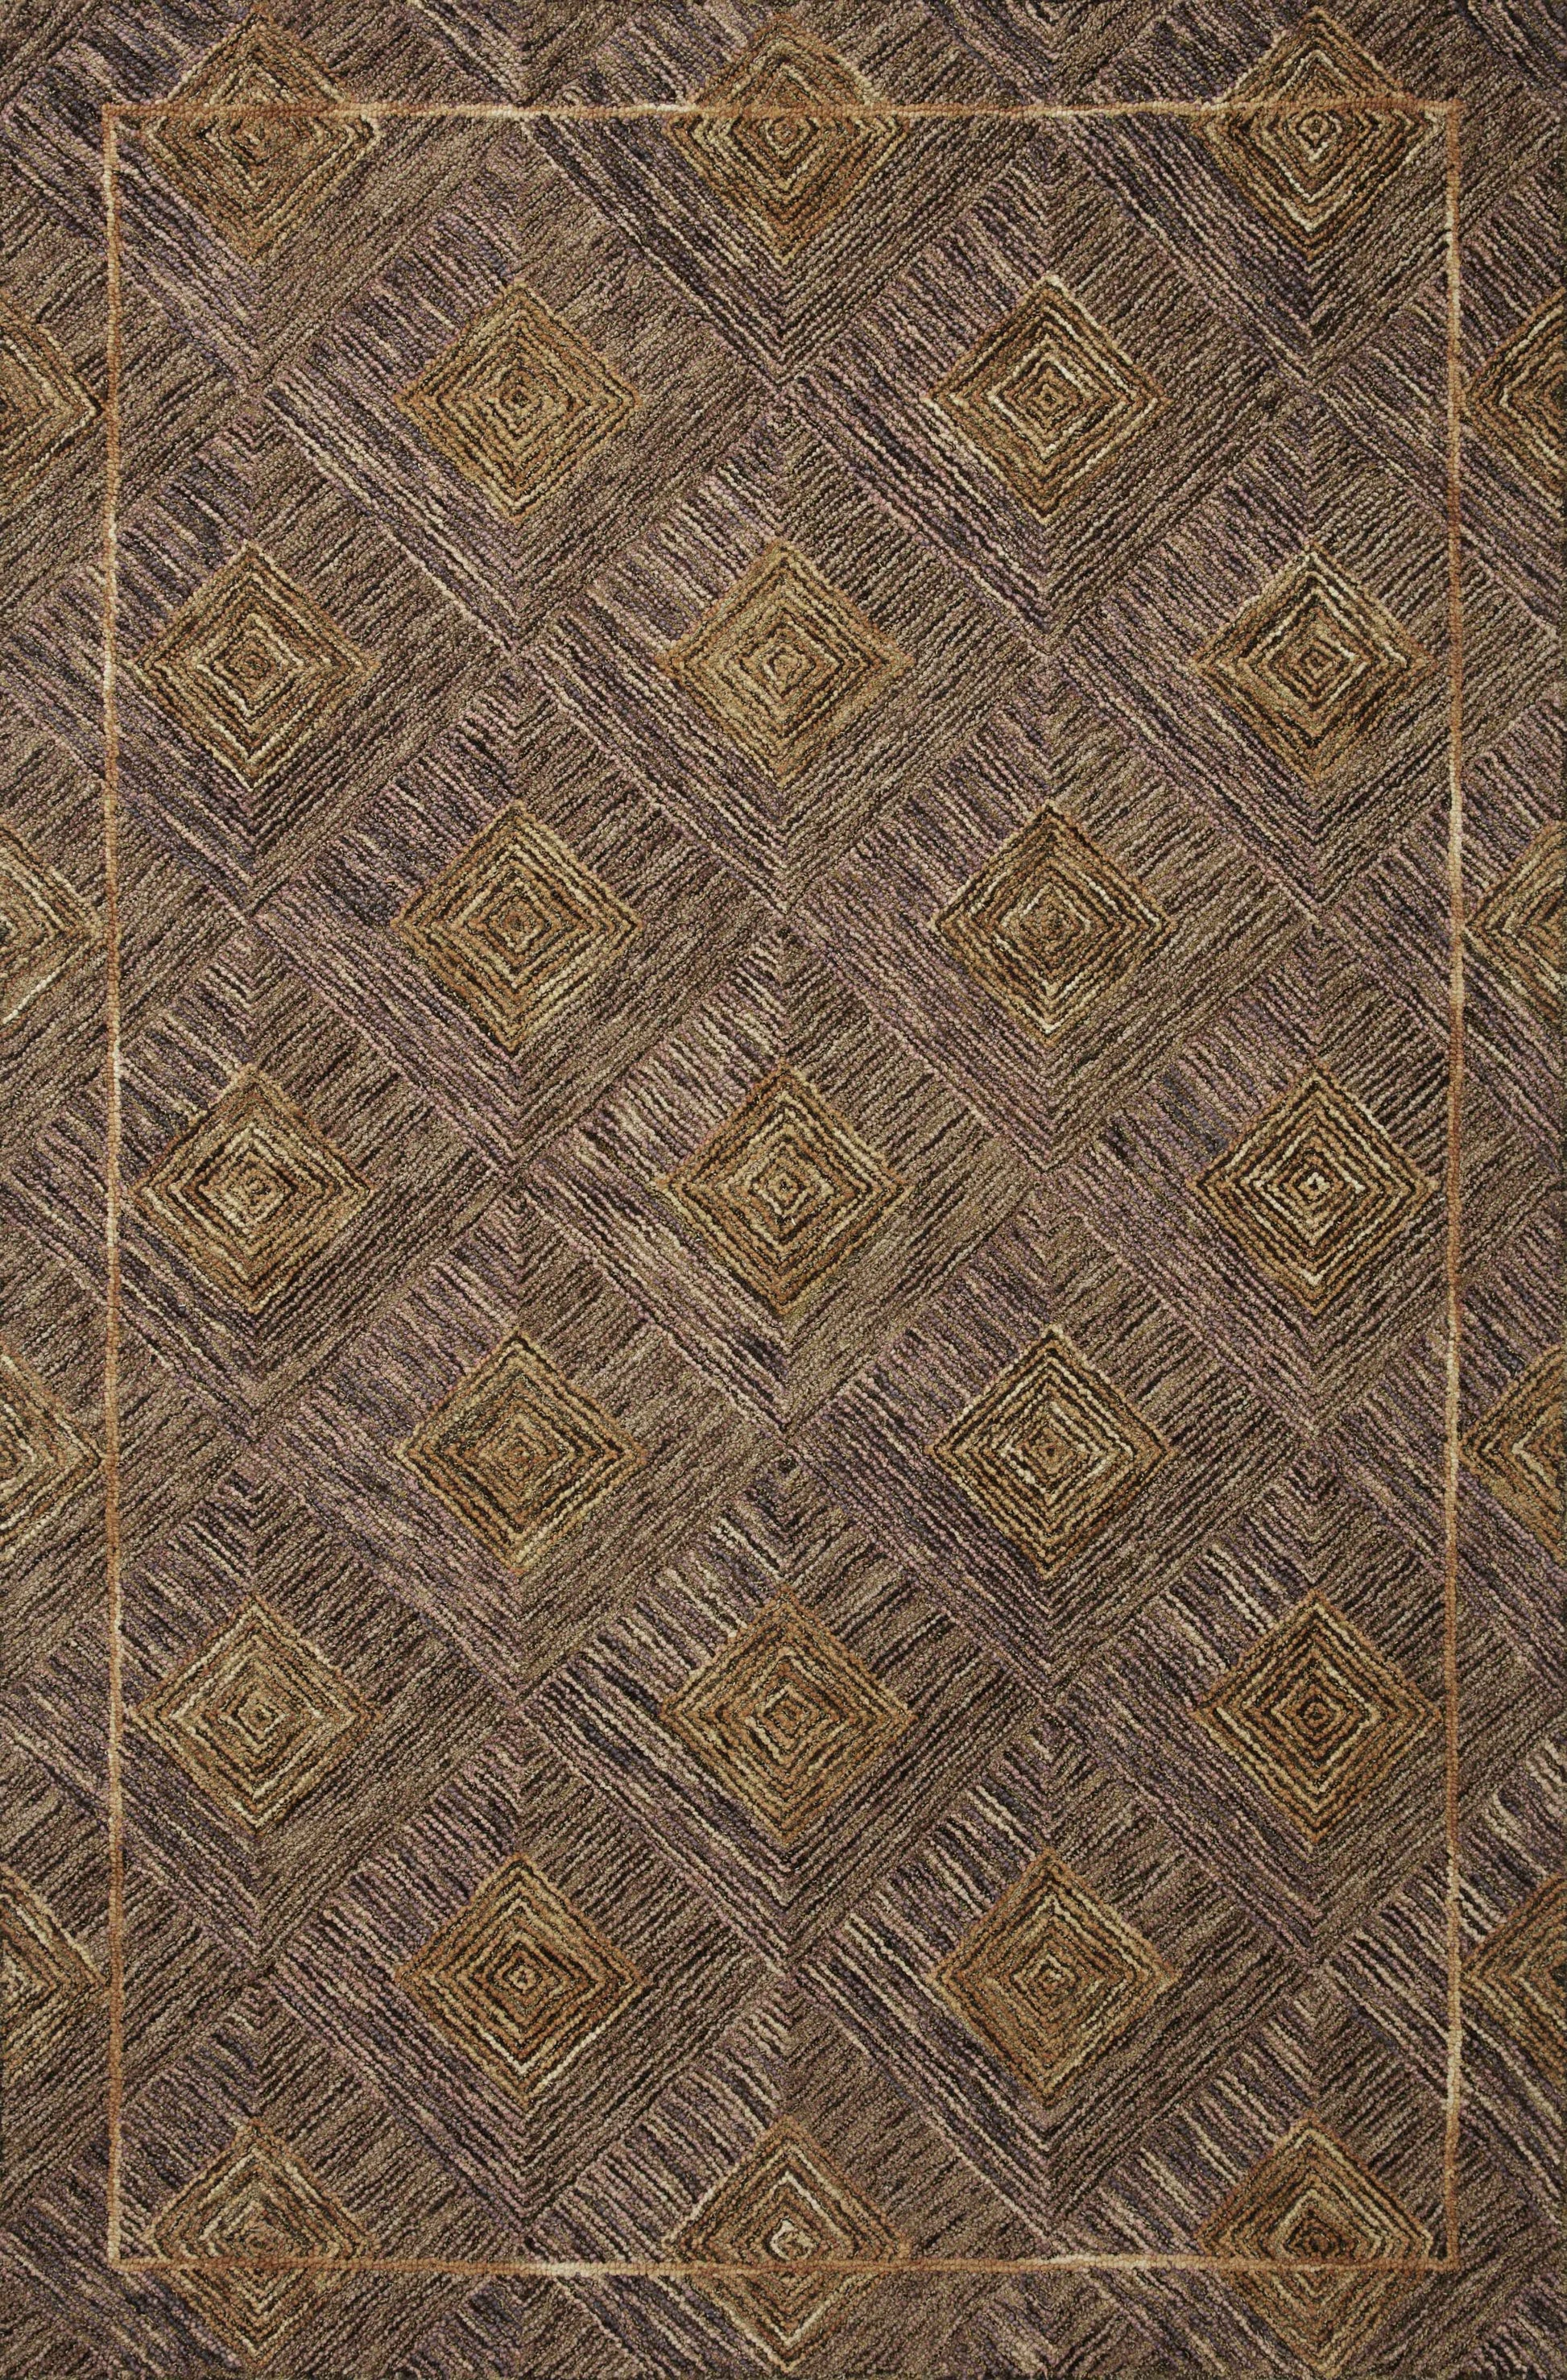 A picture of Loloi's Varena rug, in style VAR-04, color Plum / Gold